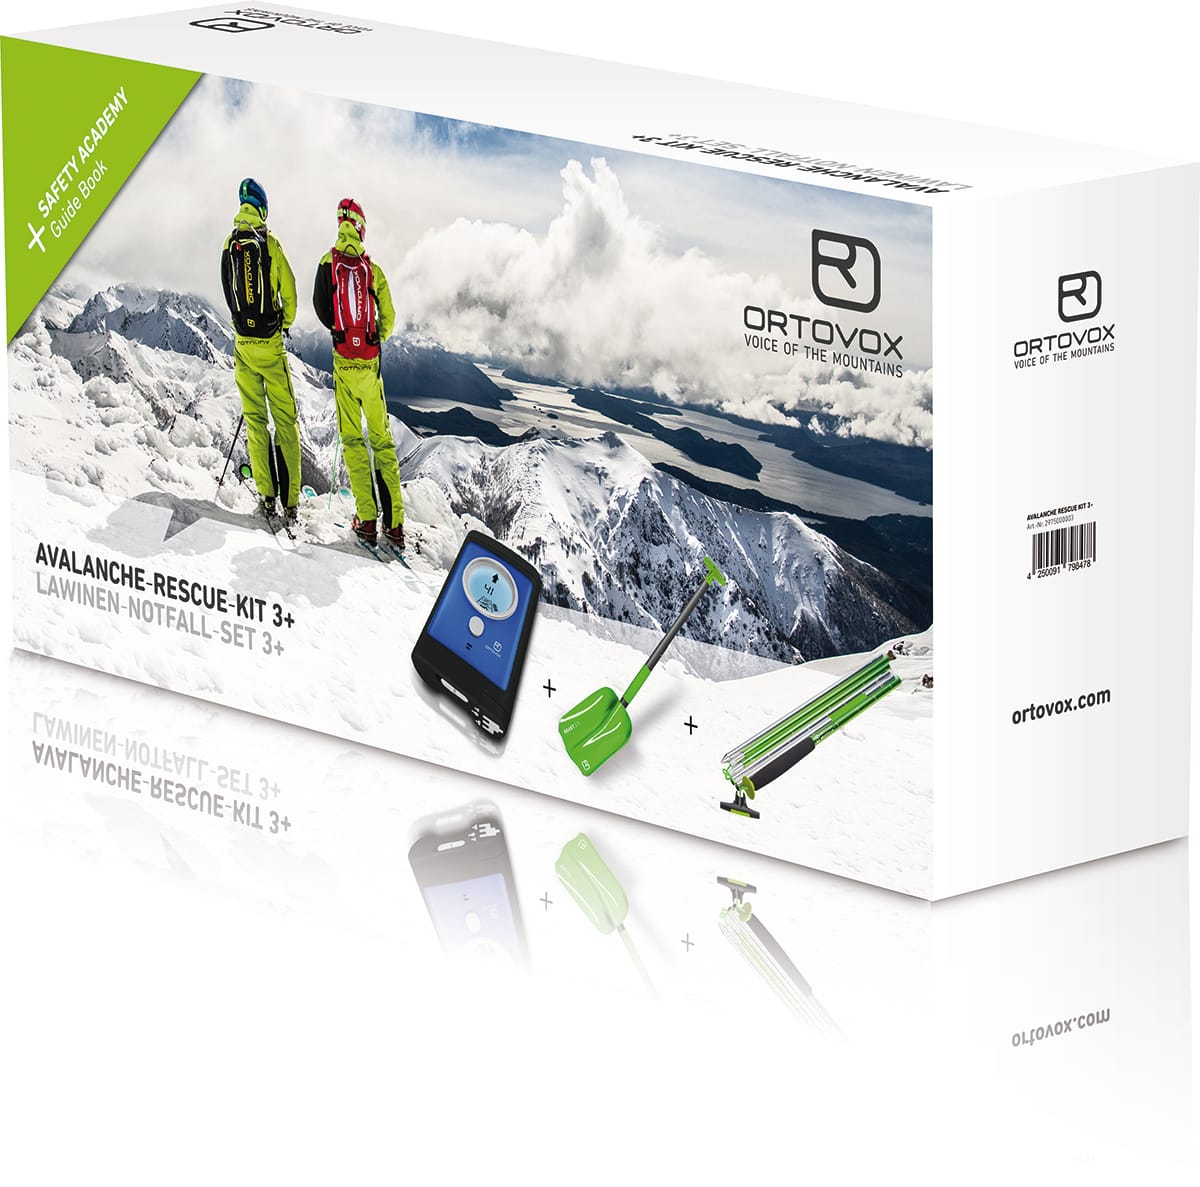 ORTOVOX 3+ AVALANCHE RESCUE KIT REVIEW